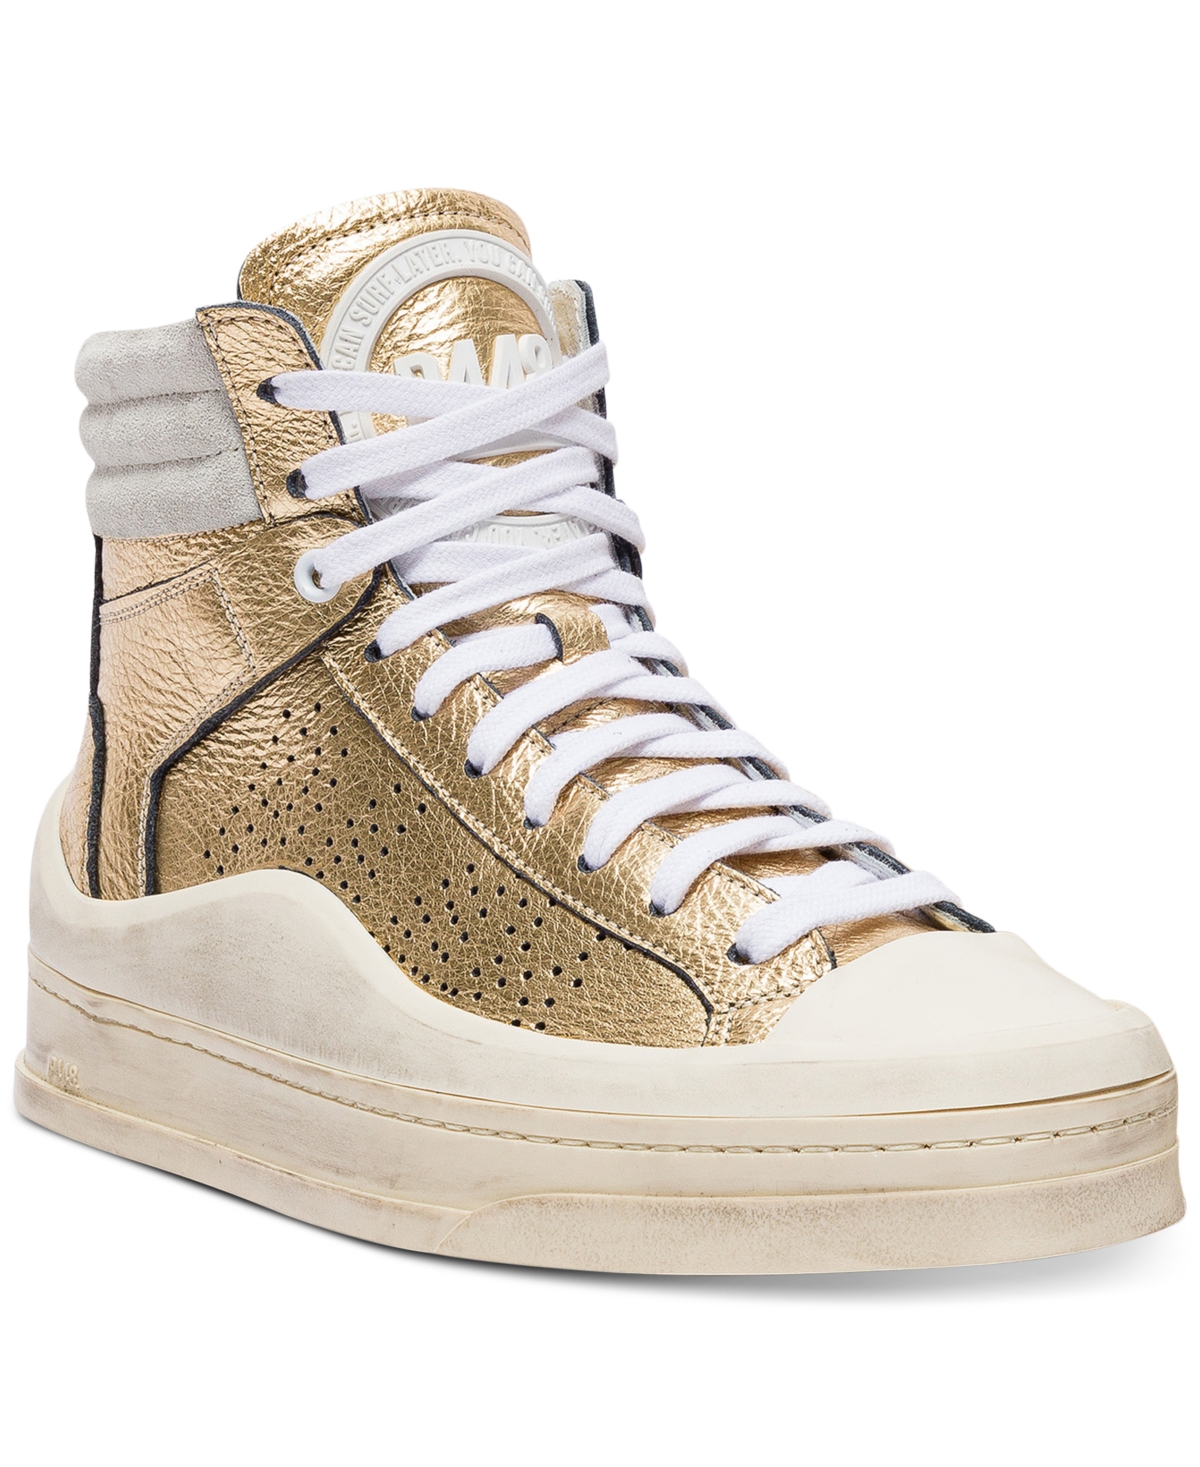 P448 Women's Rail Lace-up High-top Sneakers In Gold